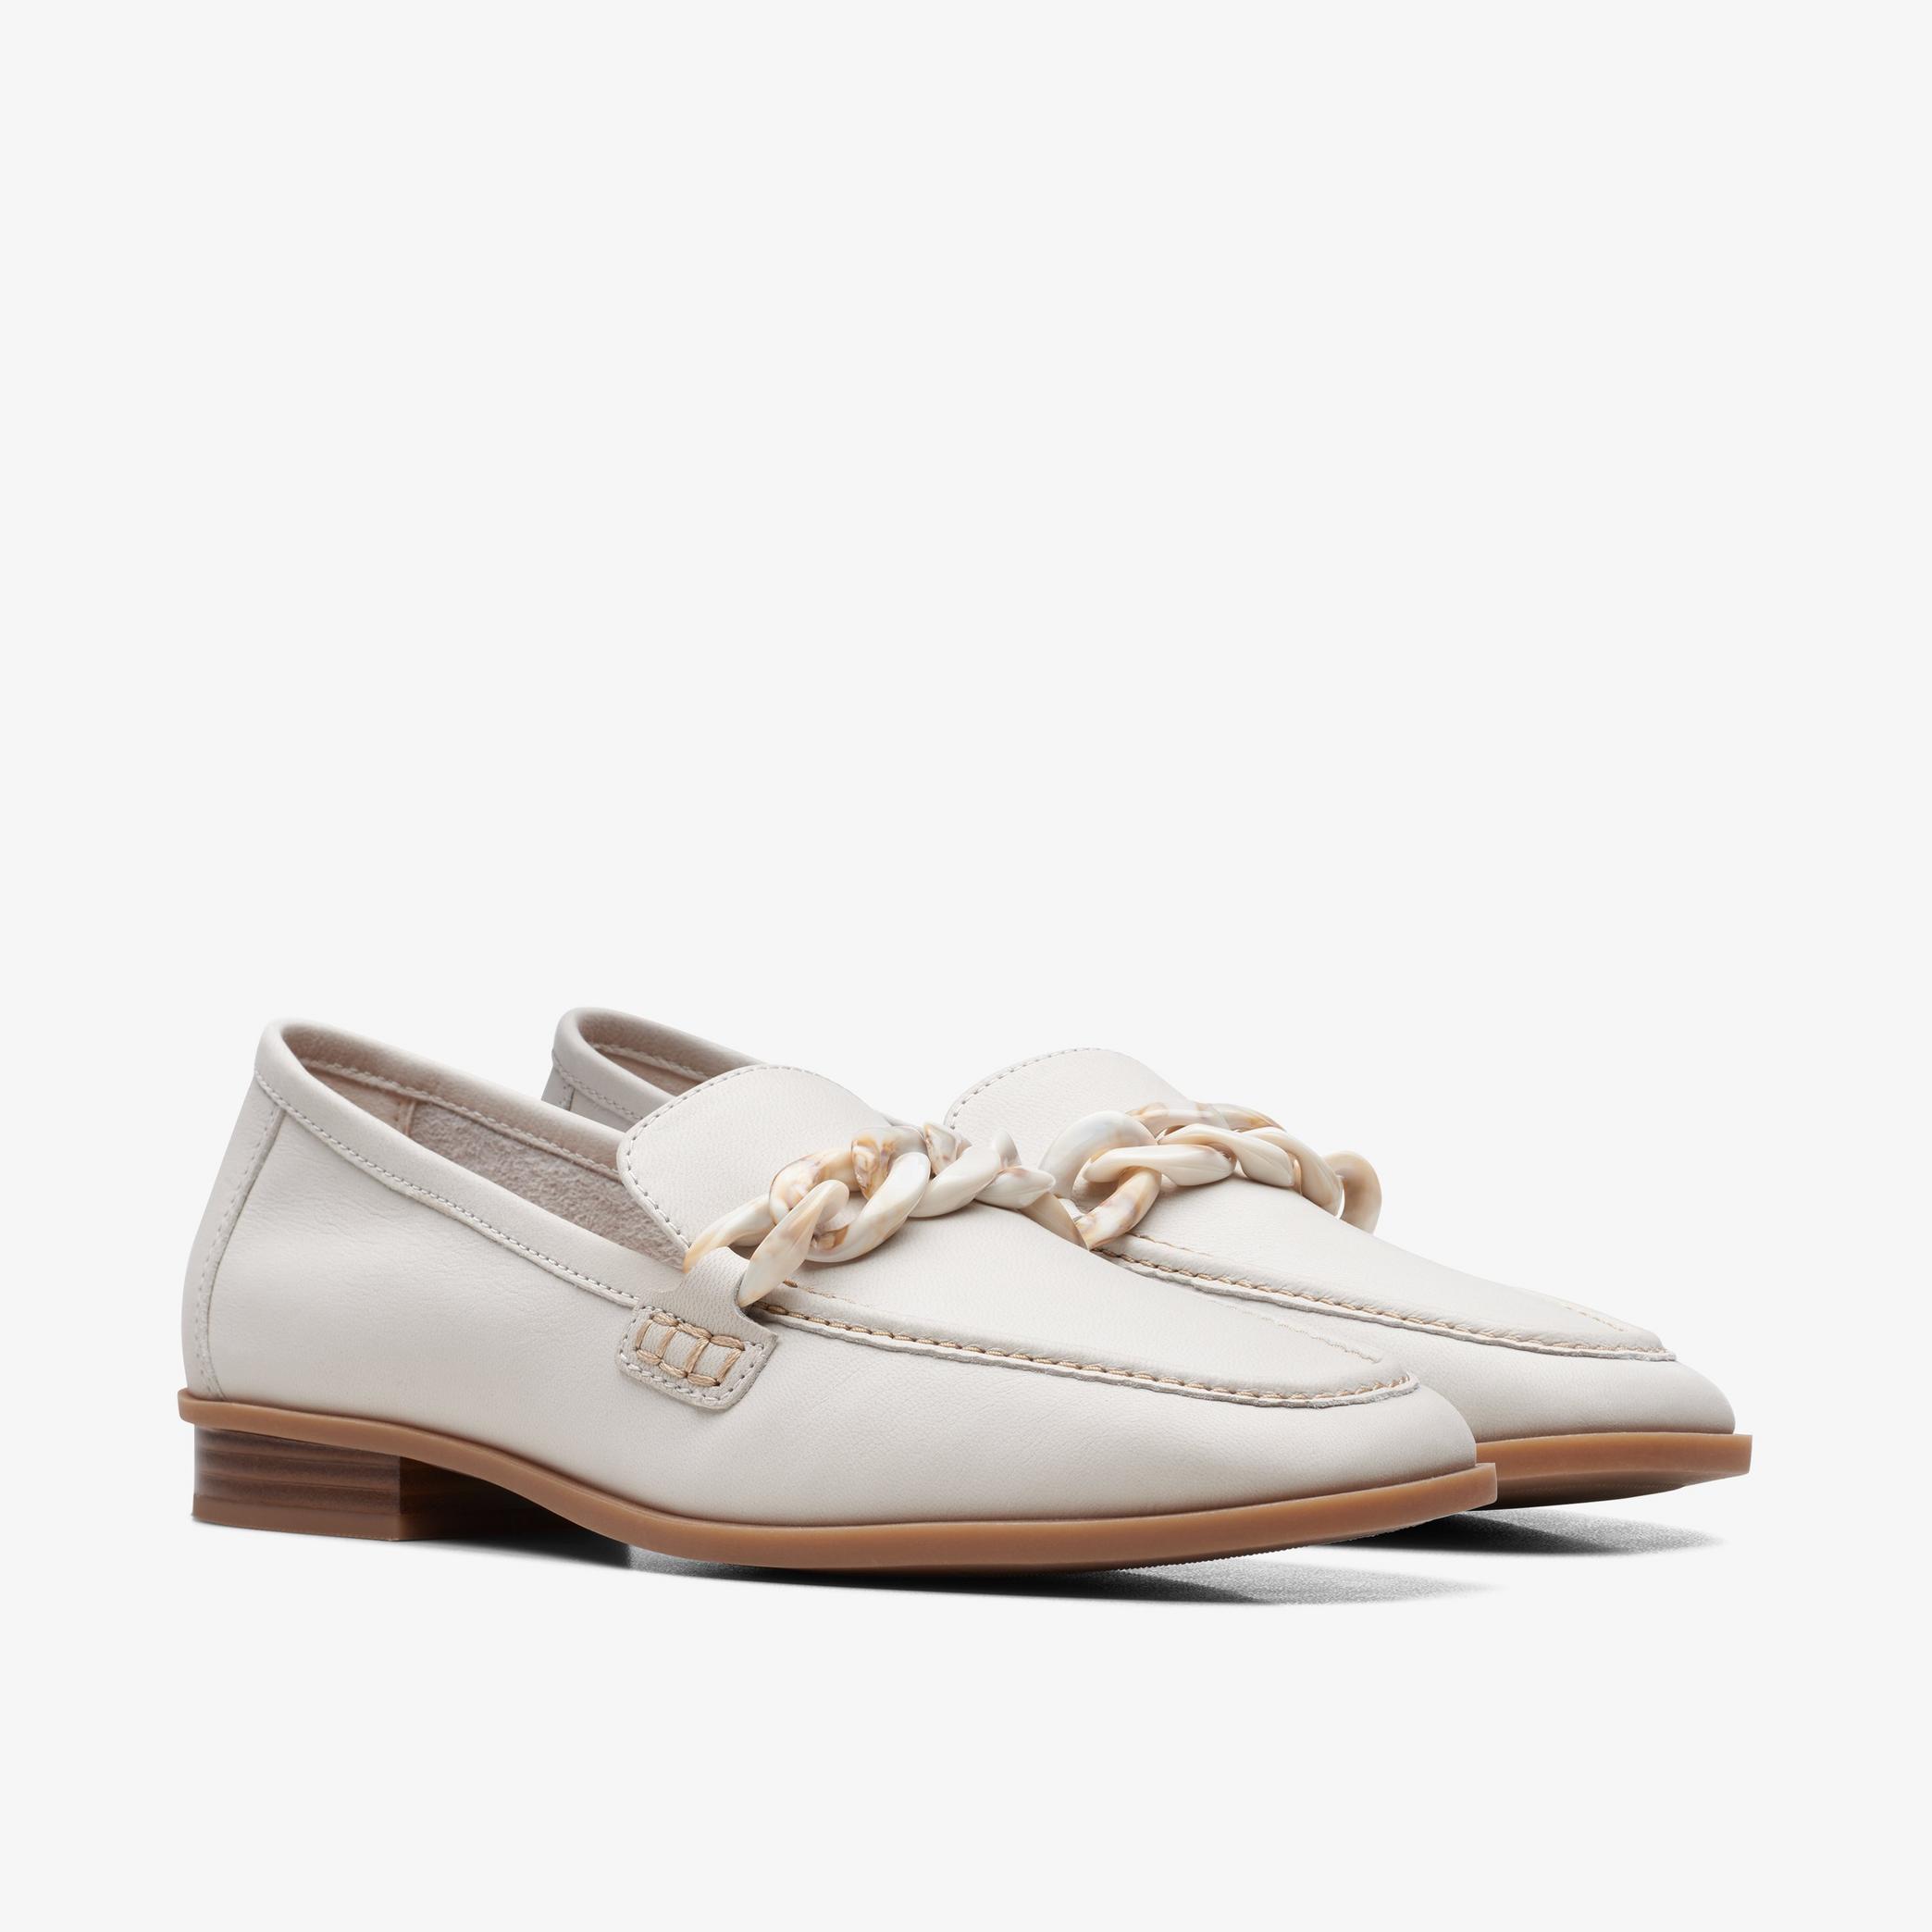 Sarafyna Iris White Leather Loafers, view 4 of 9